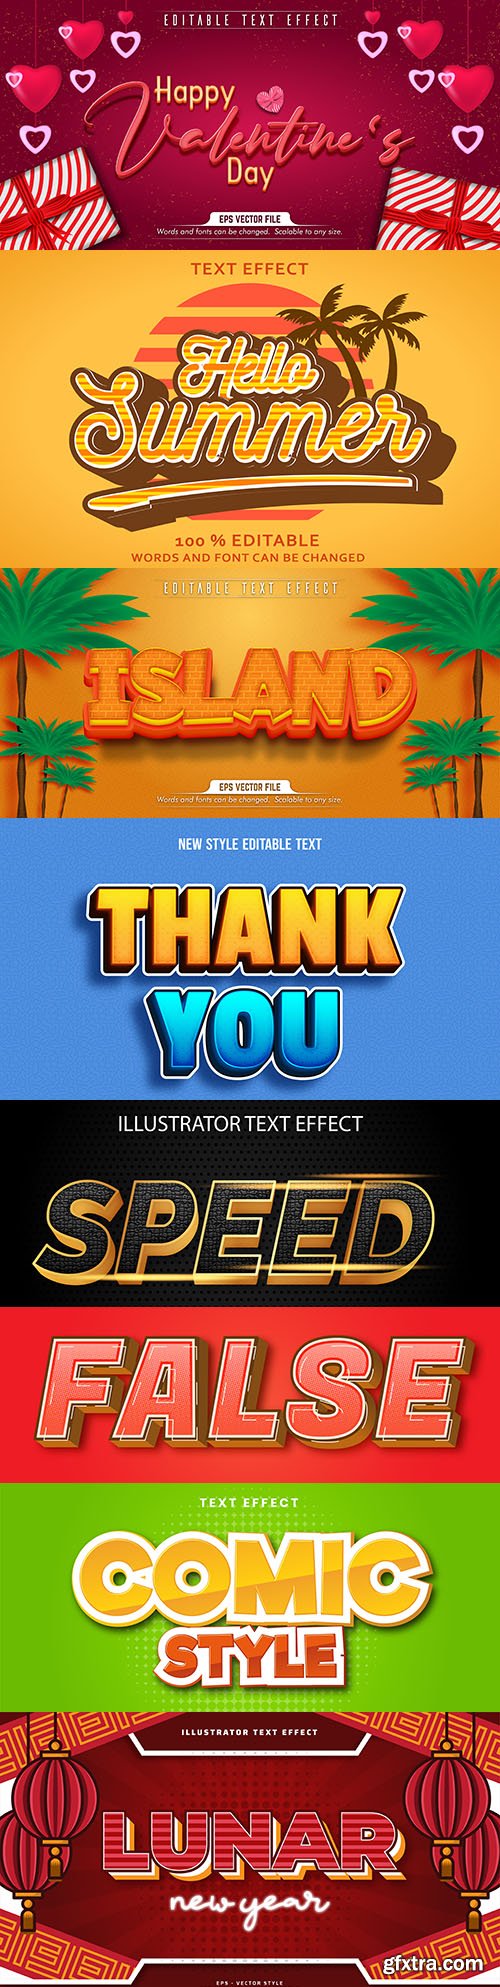 Editable font and 3d effect text design collection illustration 11